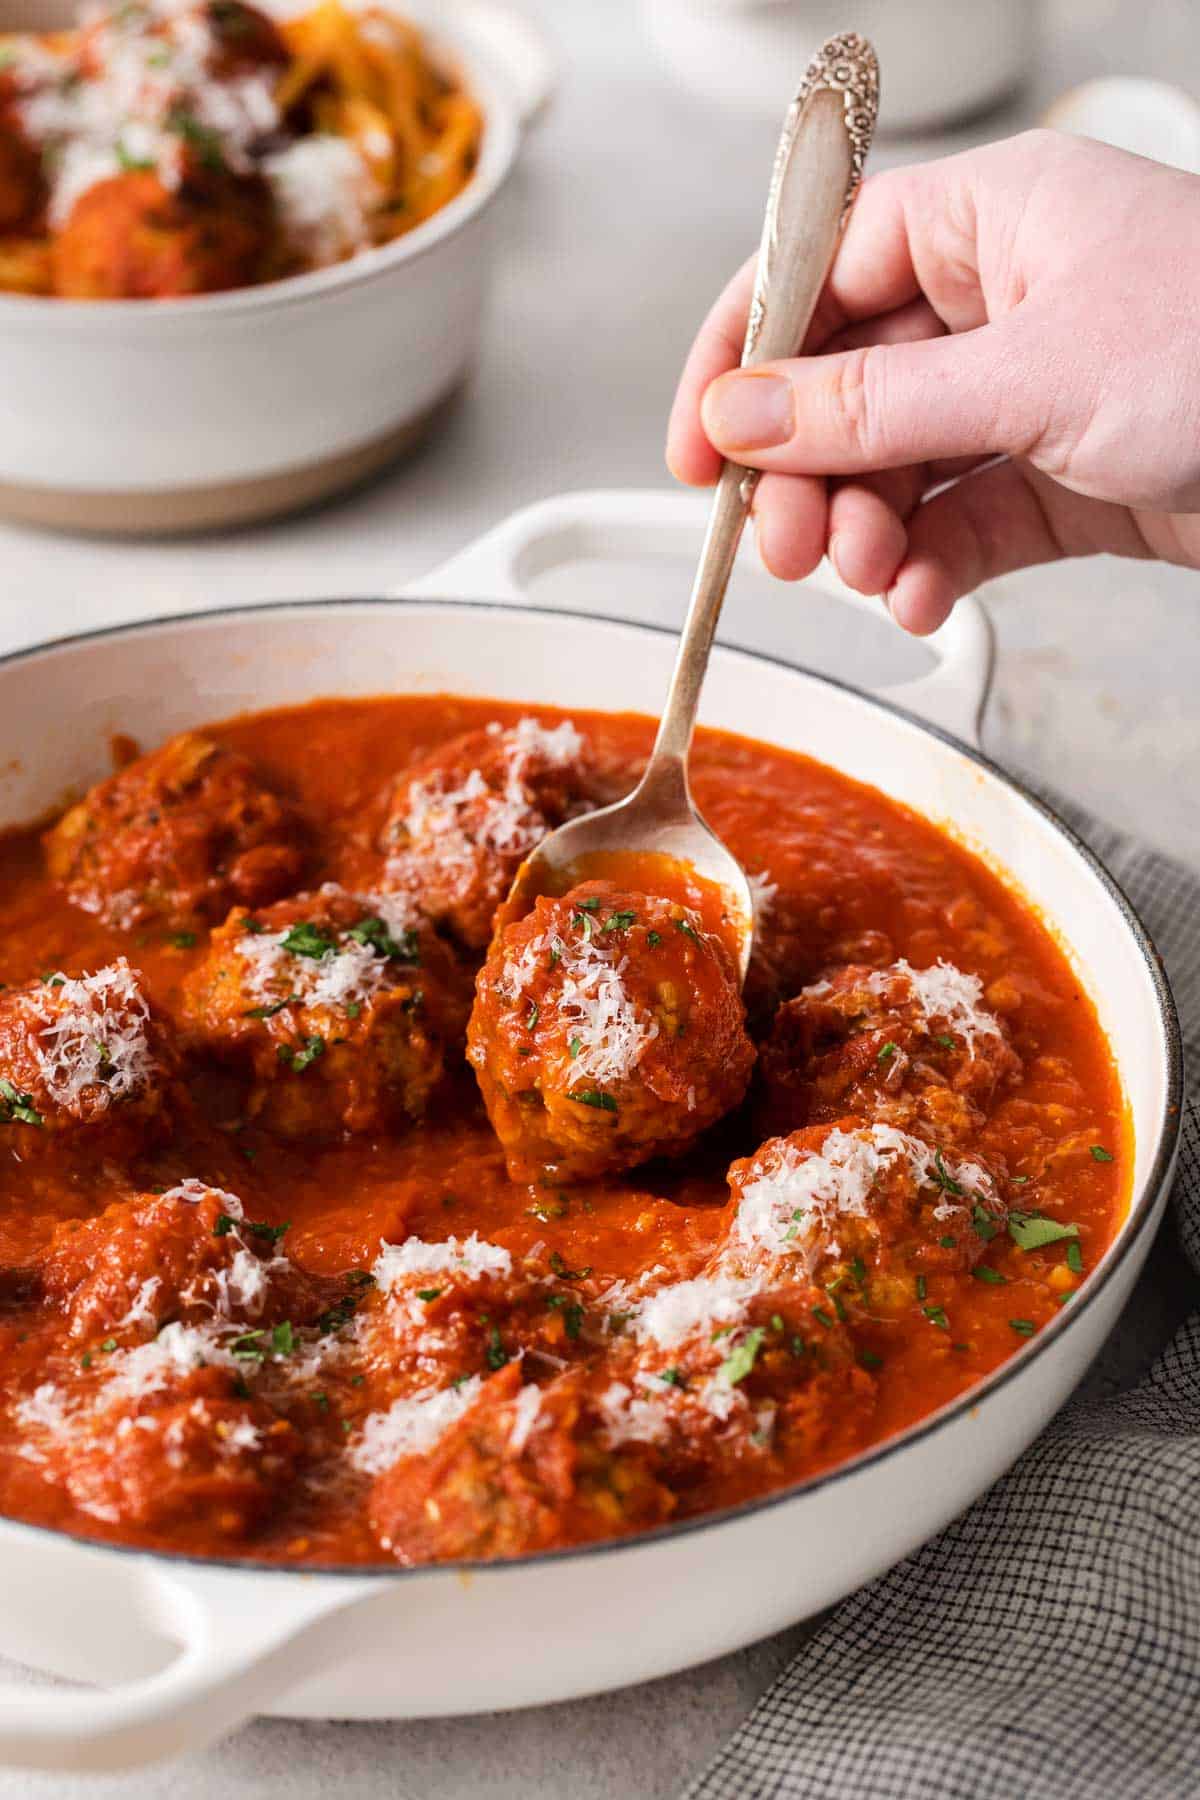 Gluten-free meatballs in a serving dish and a fork reaching in to pick up a meatball